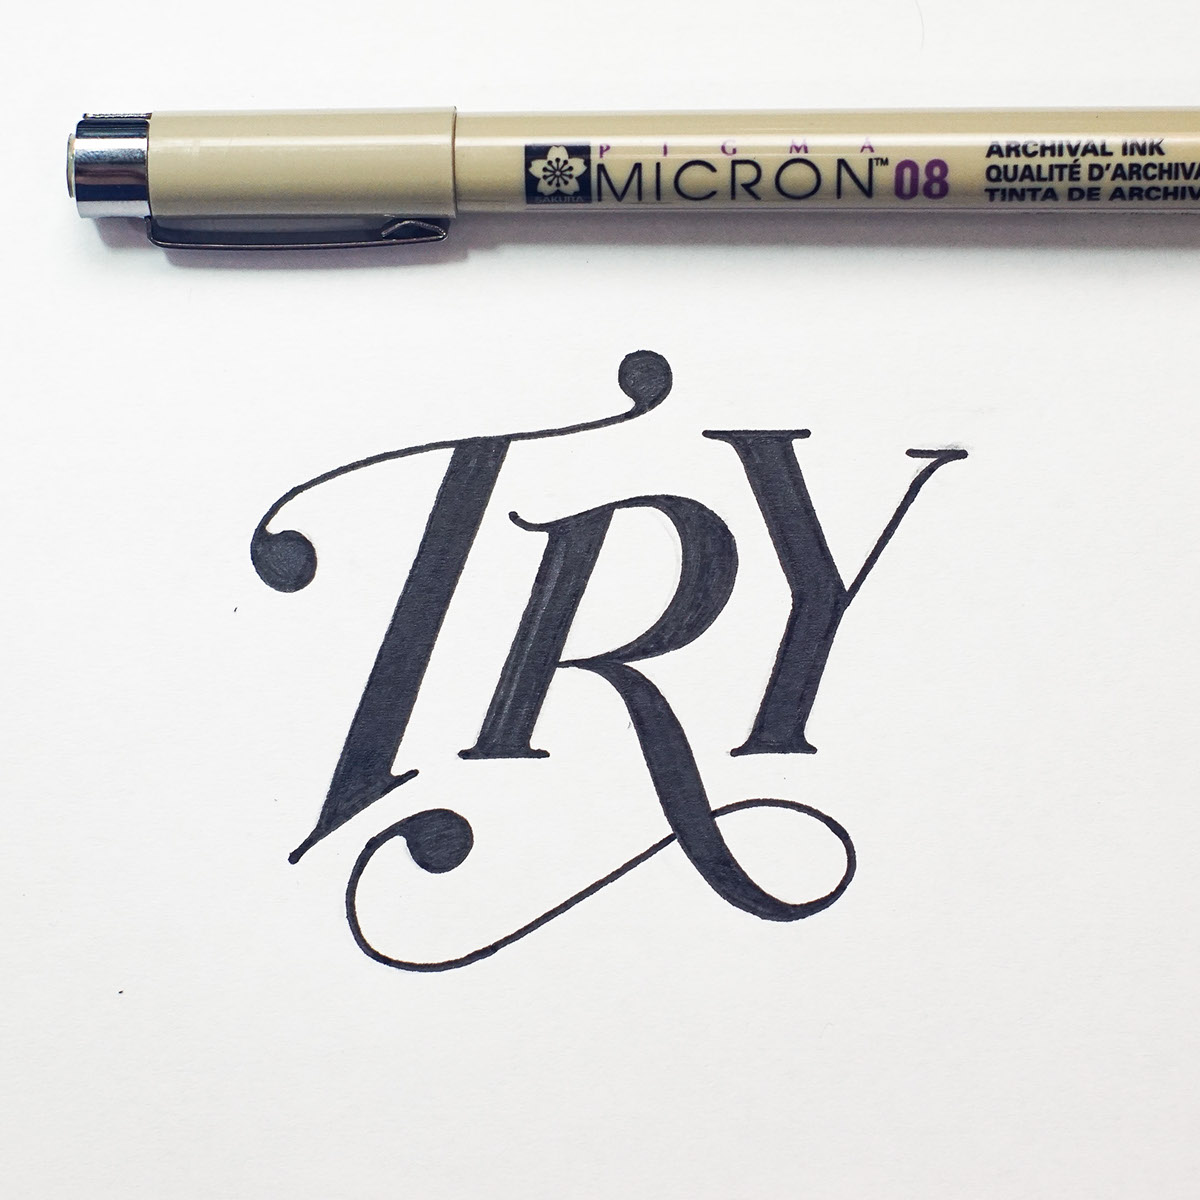 lettering typography   Calligraphy   brush pen pencil HAND LETTERING Collection